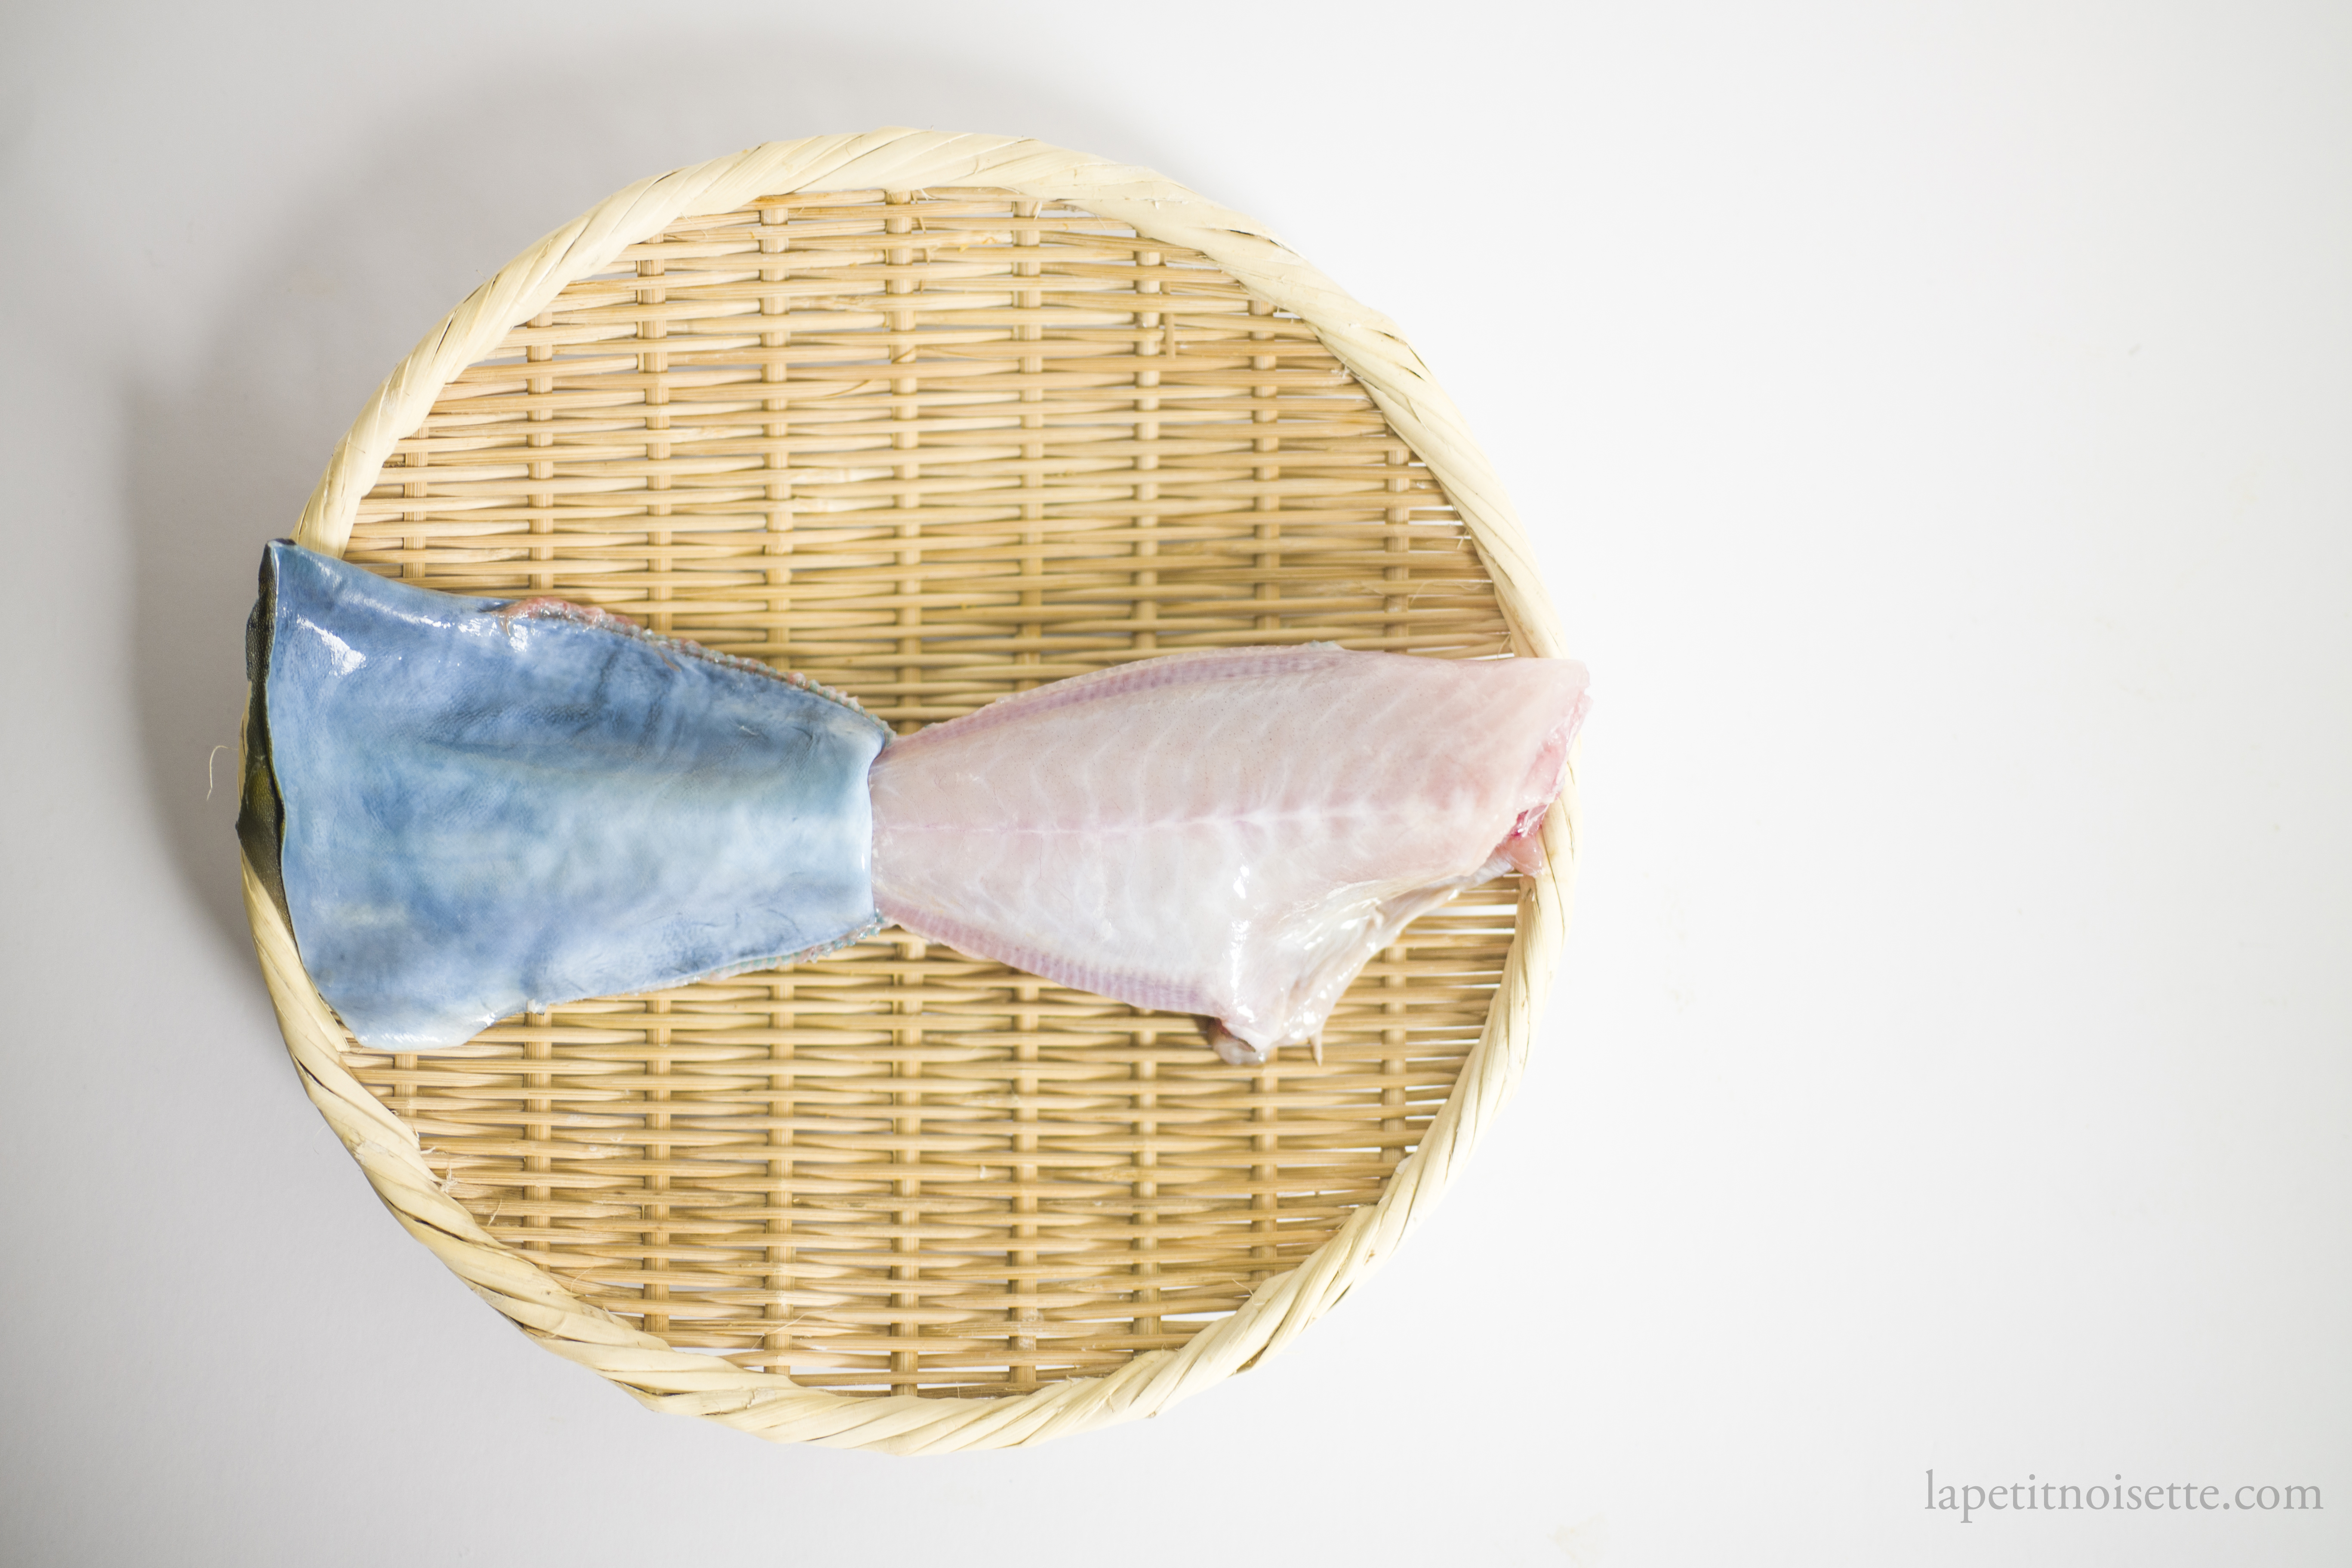 the skin of a japanese kawahagi fish can be removed by pulling.